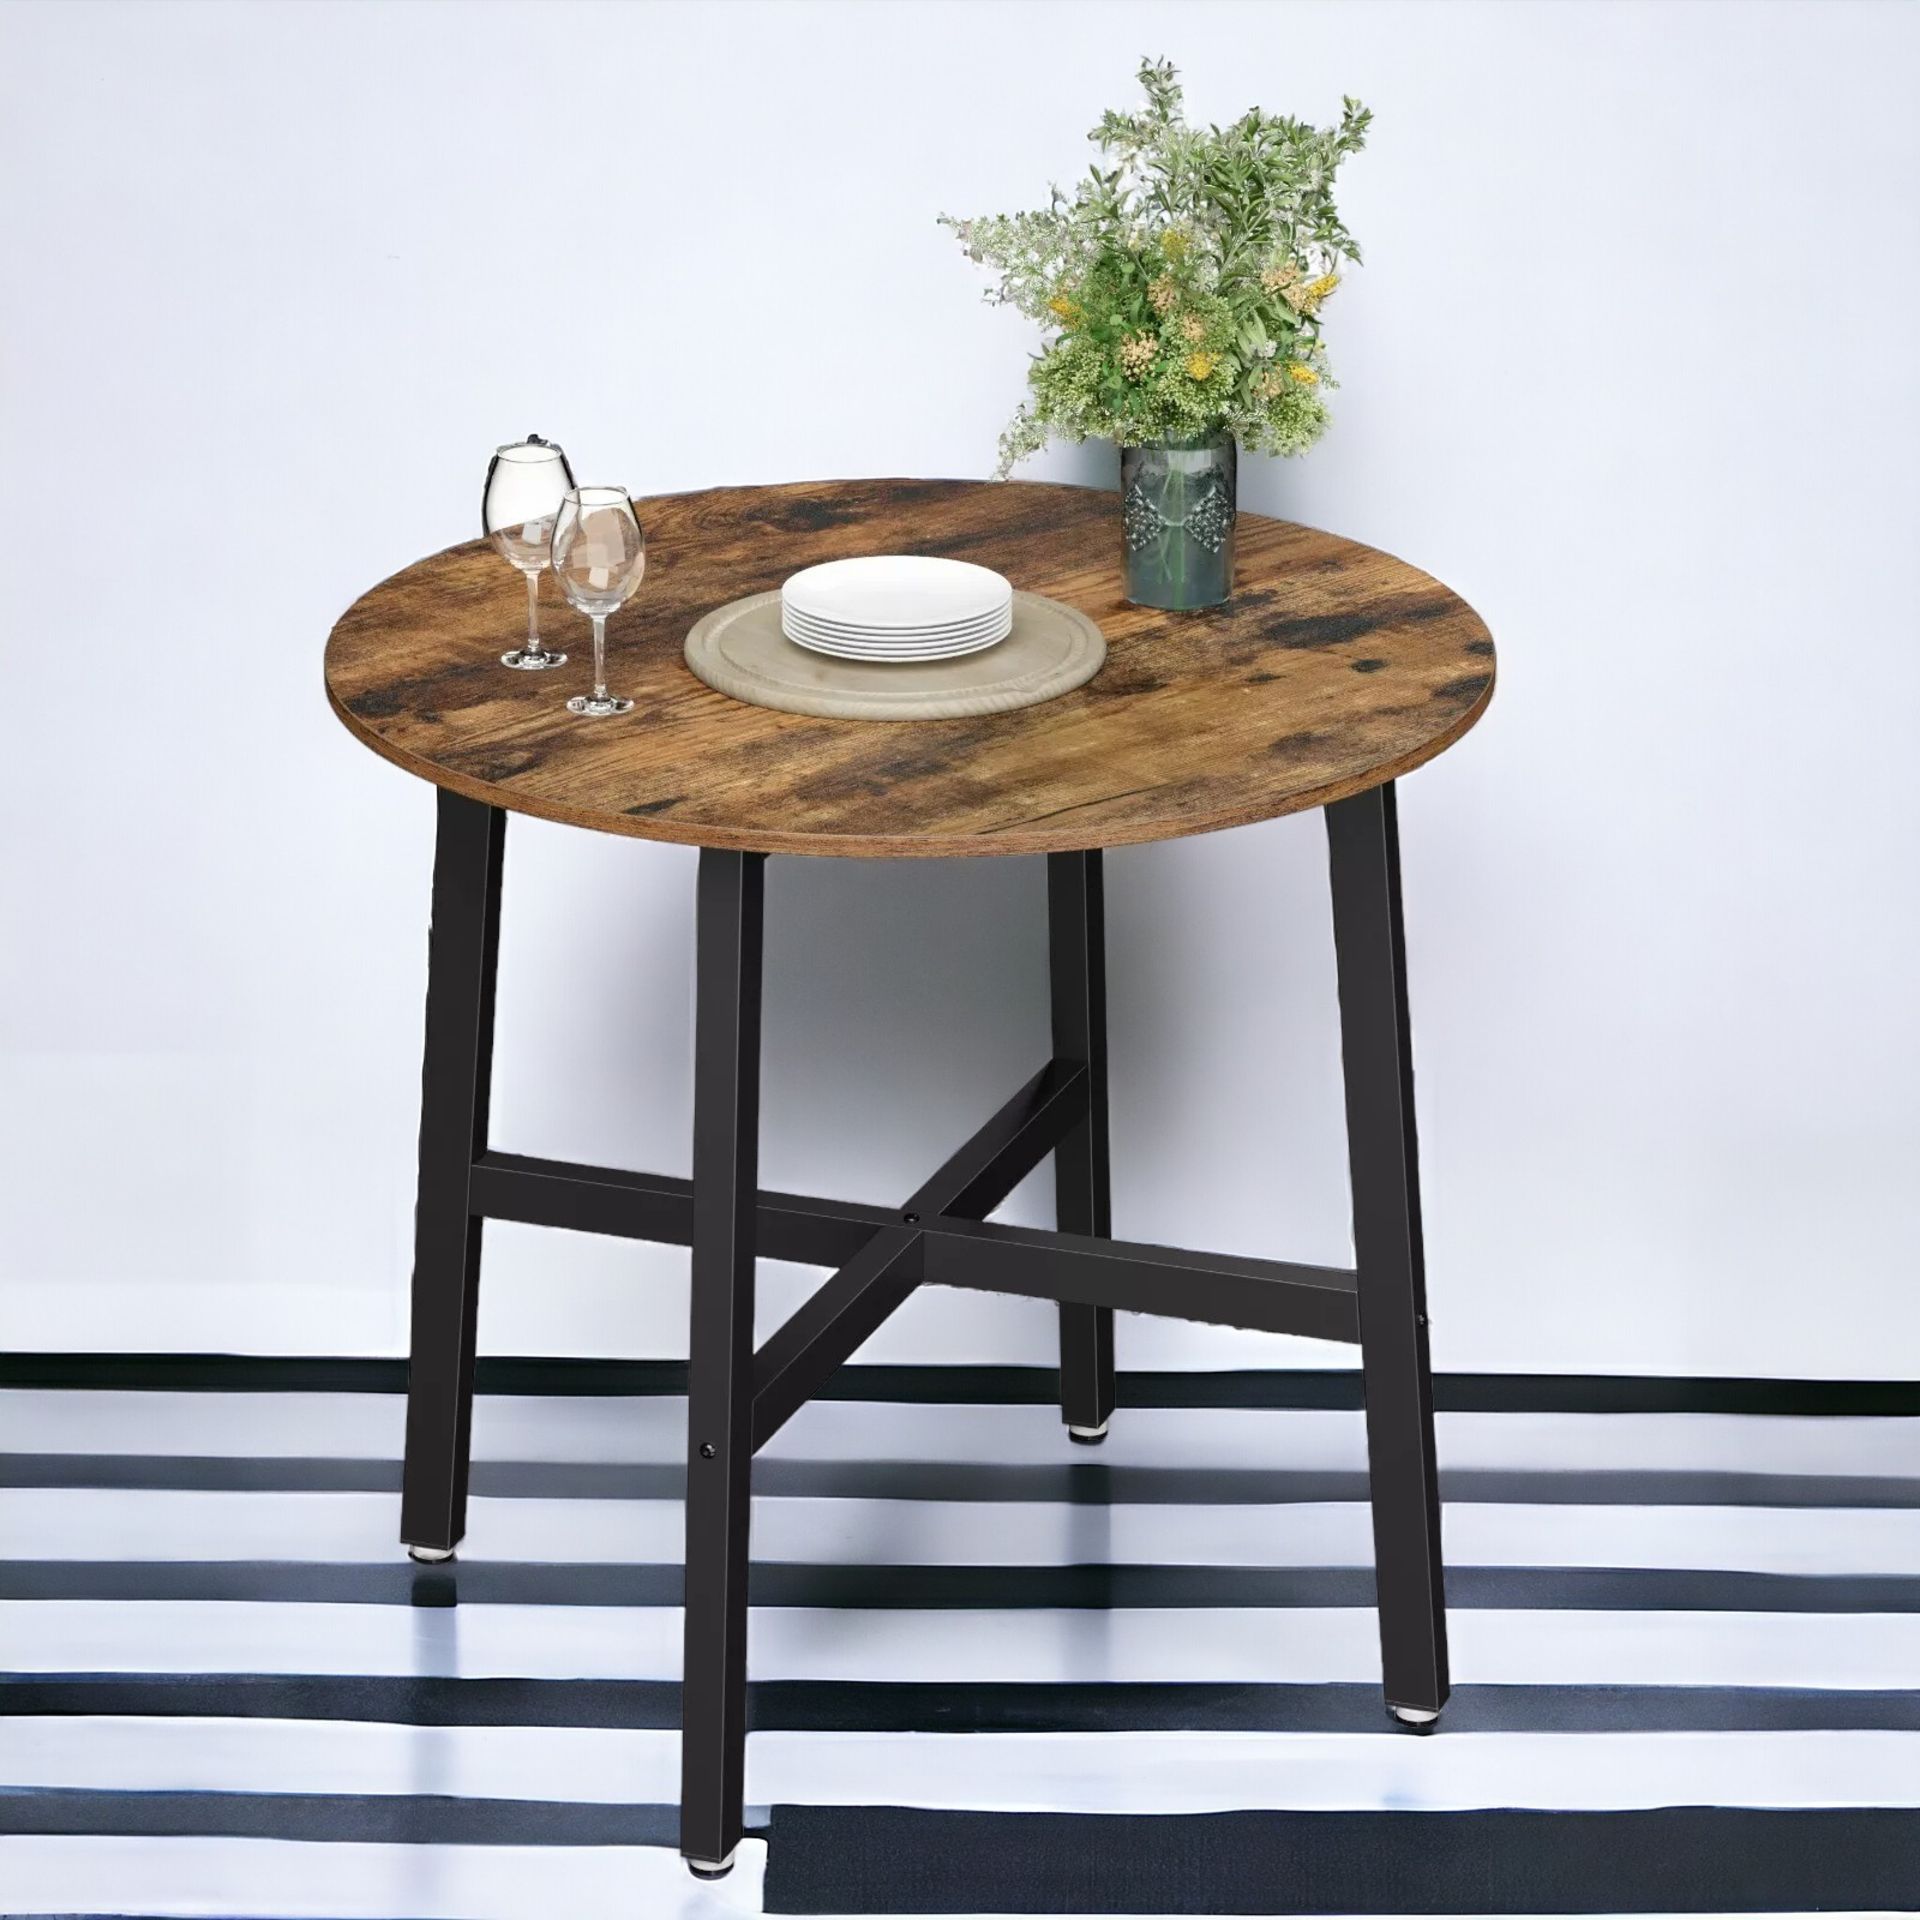 FREE DELIVERY - BRAND NEW VASAGLE DINING TABLE ROUND KITCHEN TABLE KITCHENFURNITURE - Image 2 of 2